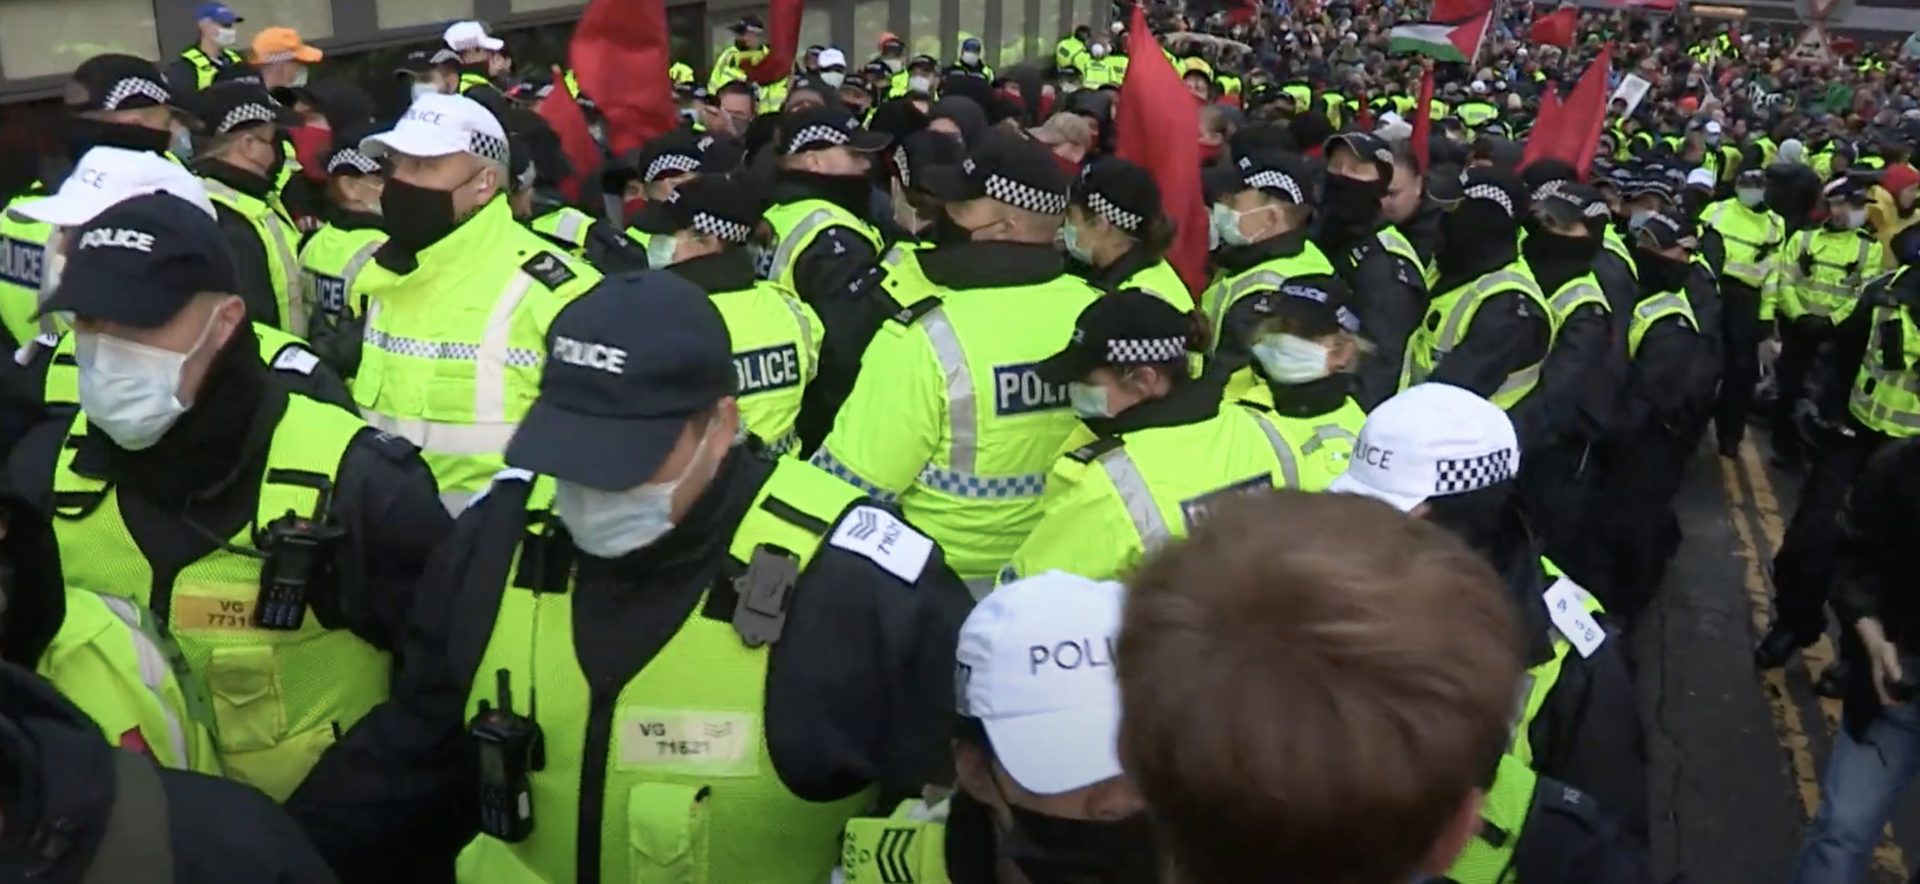 Police Scotland 'lied' about its policing of two protests during COP26, according to new report 5